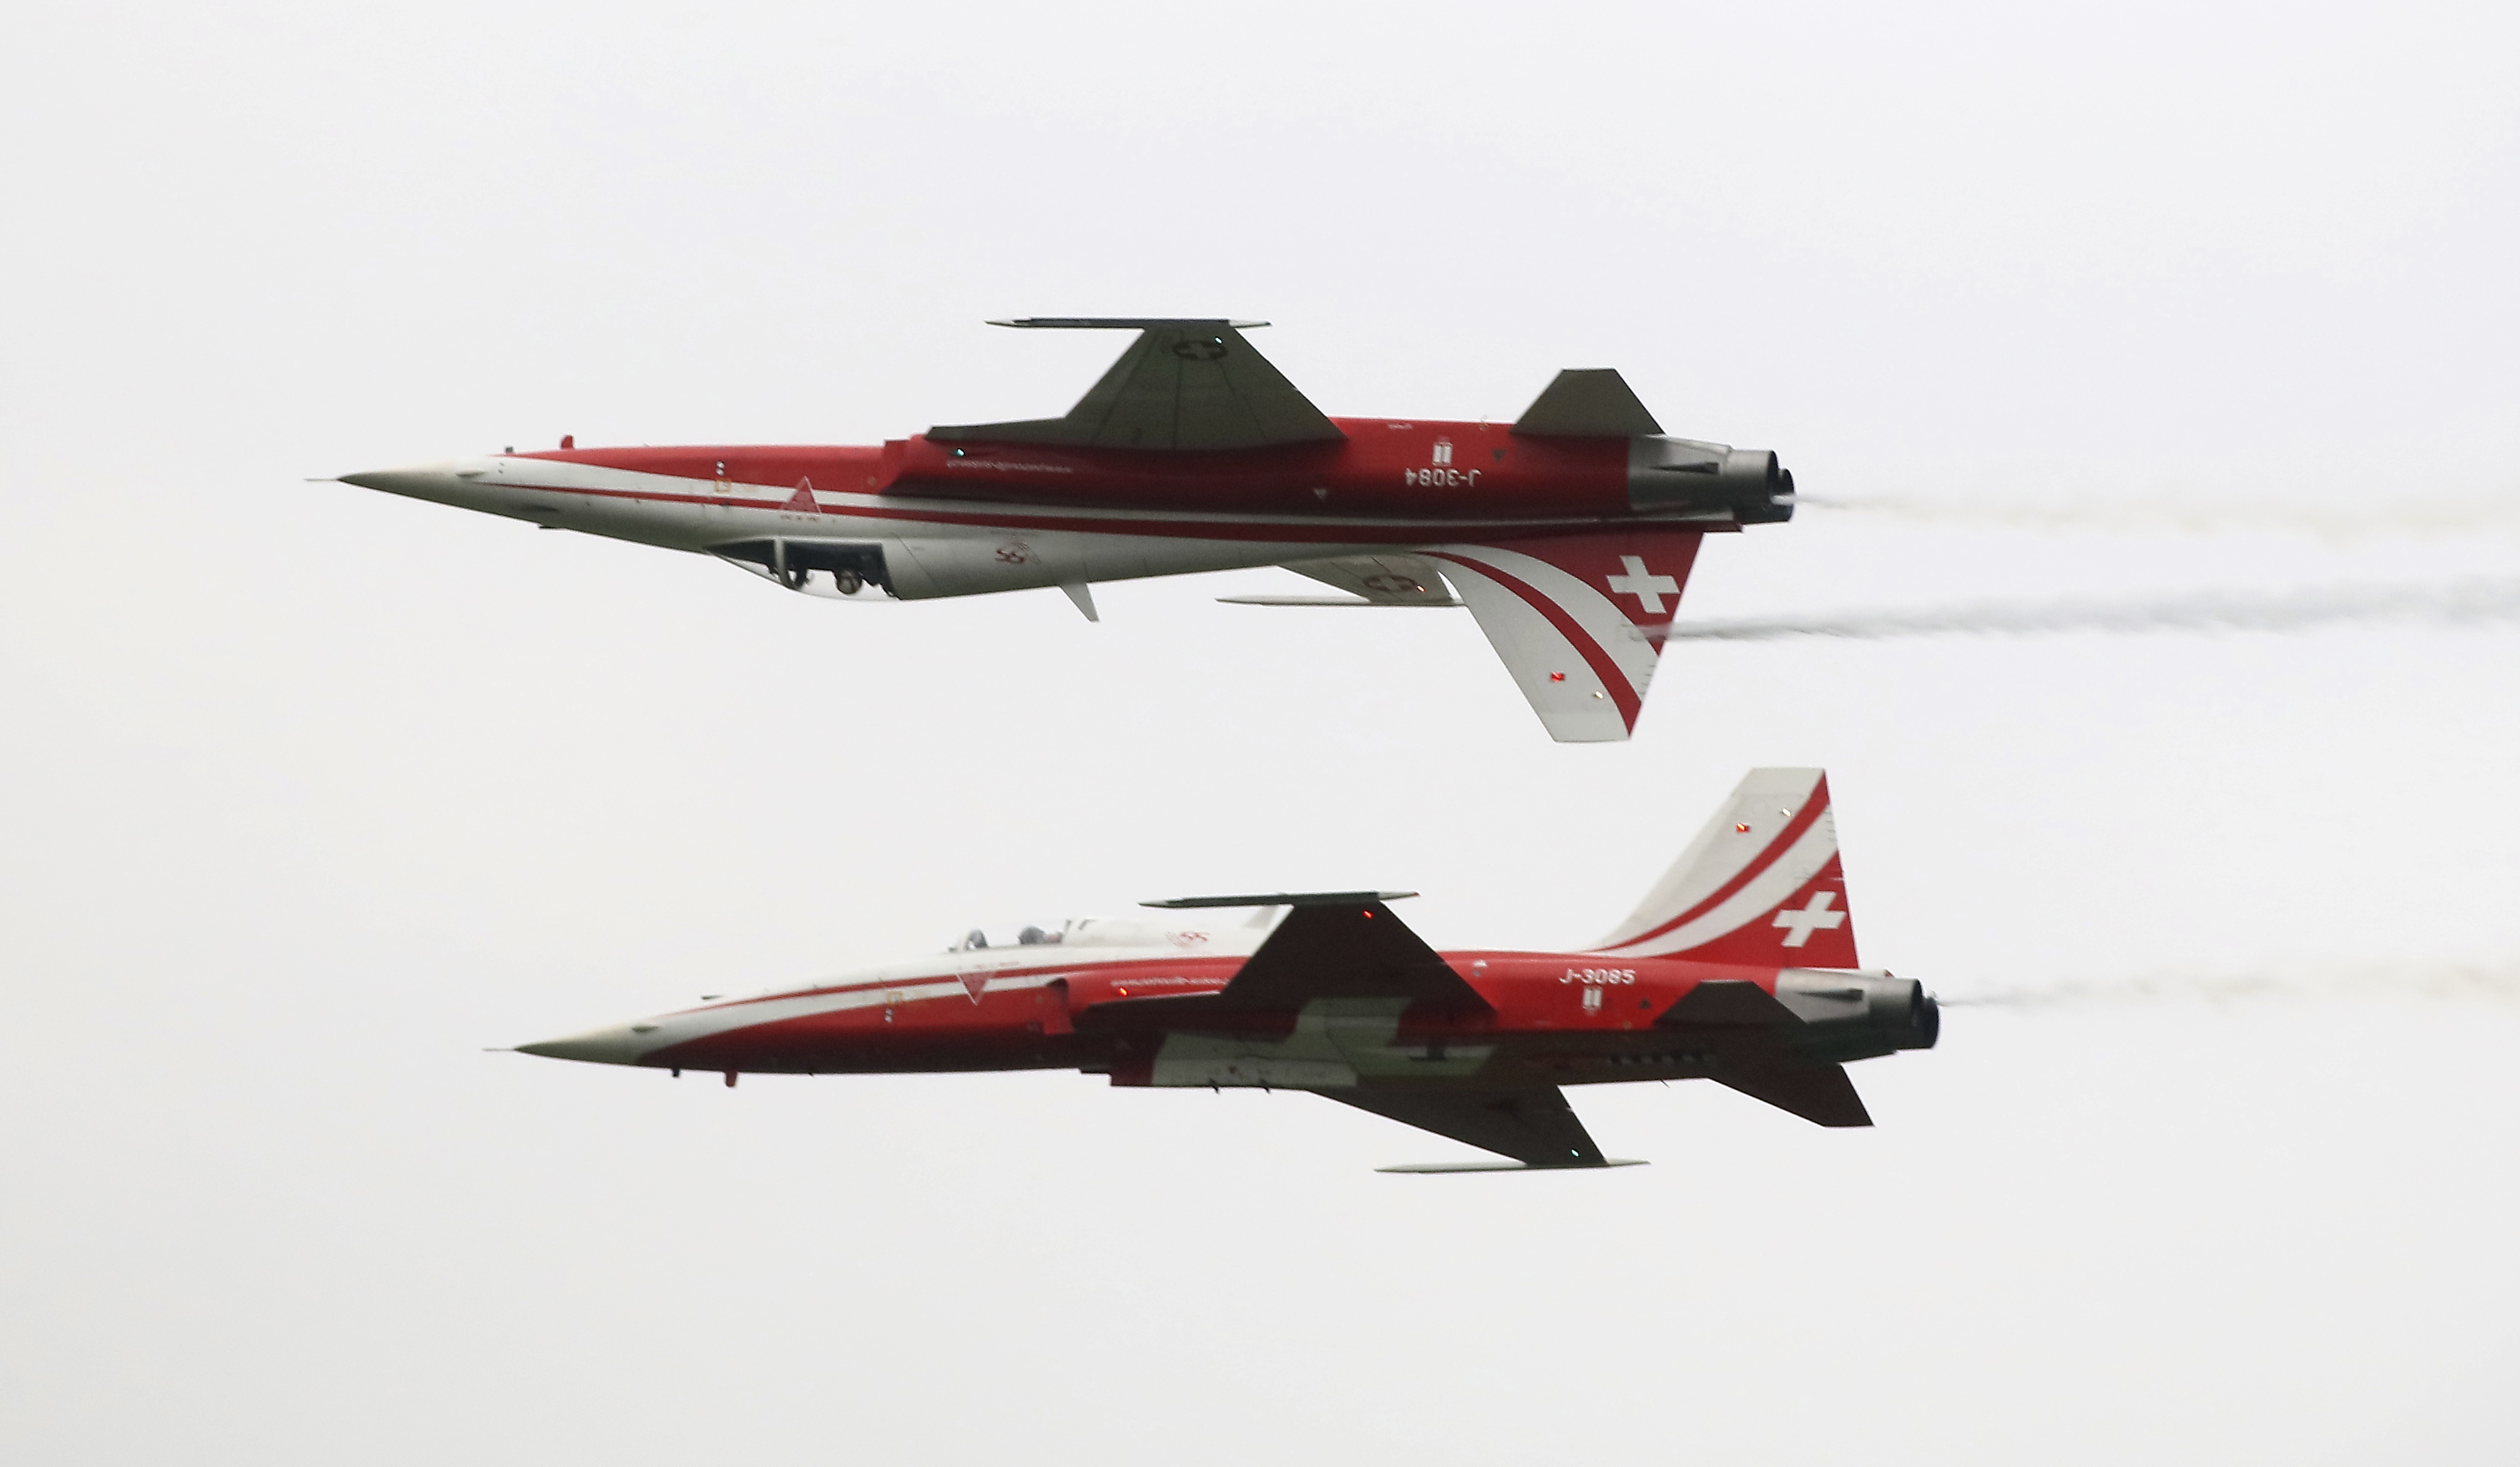 Patrouille Suisse on F-5 Tiger II perform their show during the Airpower 19 airplane show in Zeltweg, Styria, Austria, Friday, Sept. 6, 2019. (AP Photo/Ronald Zak)